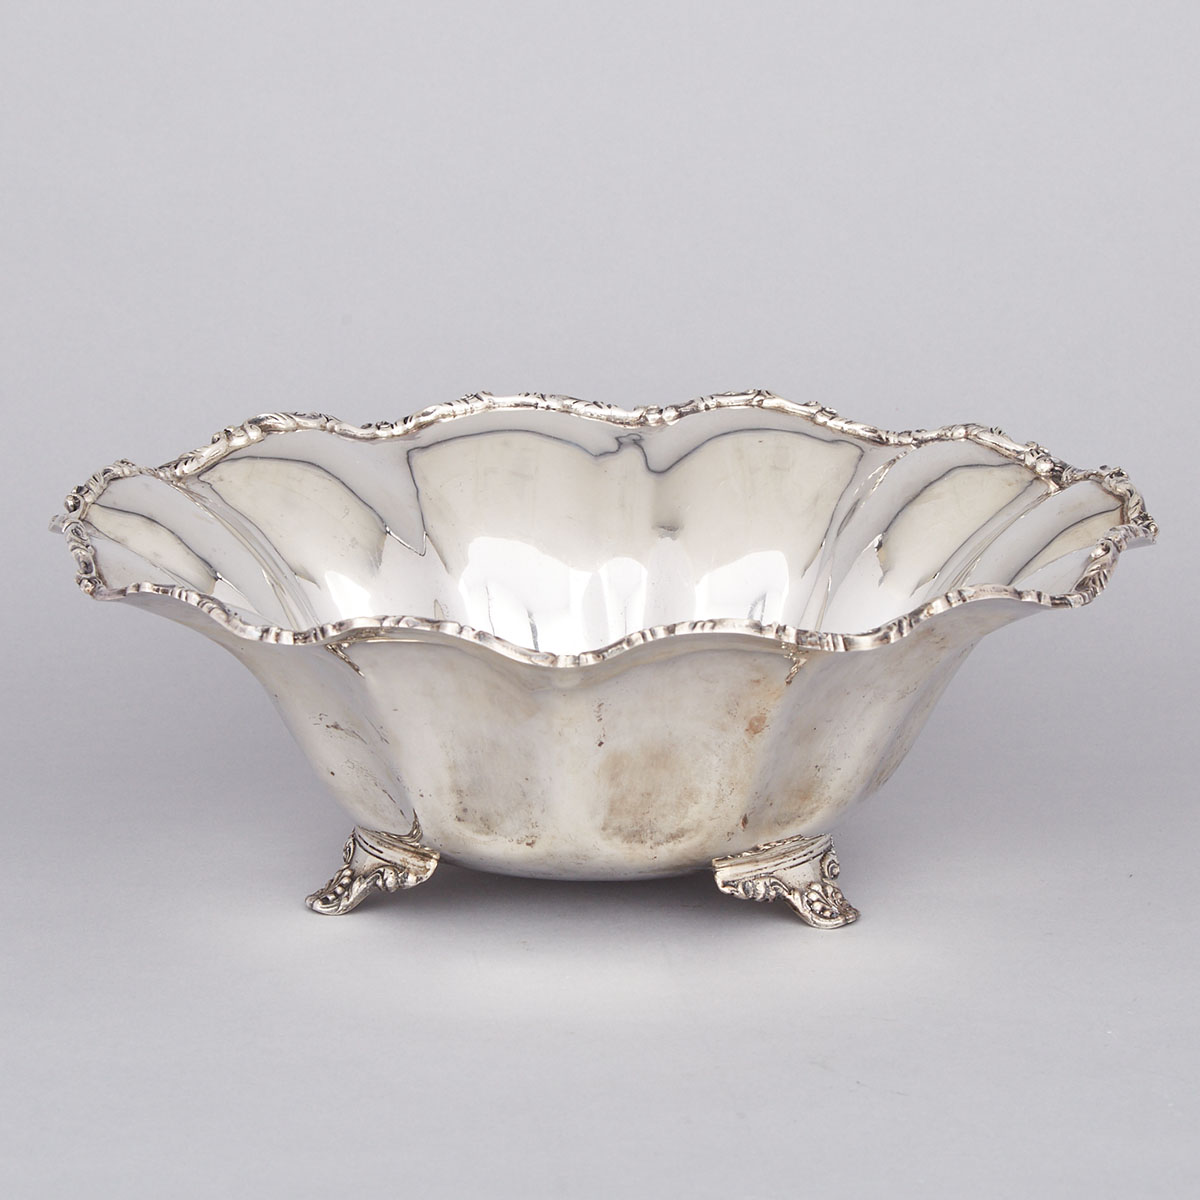 Mexican Silver Centrepiece Bowl, mid-20th century